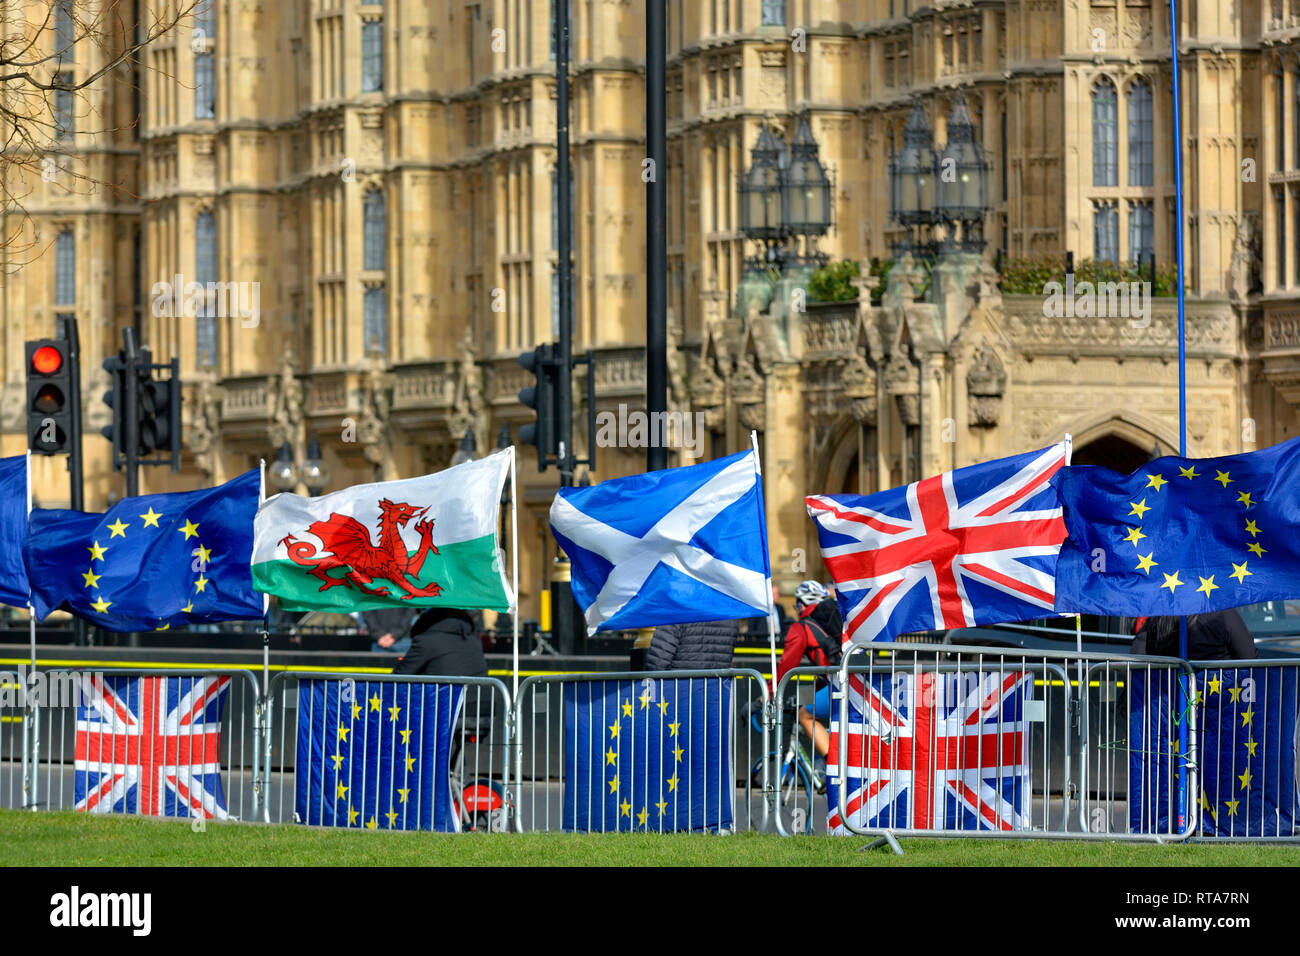 London, England, UK. British and EU flags outside Parliament as part of an anti-Brexit protest, Feb 2019 Stock Photo